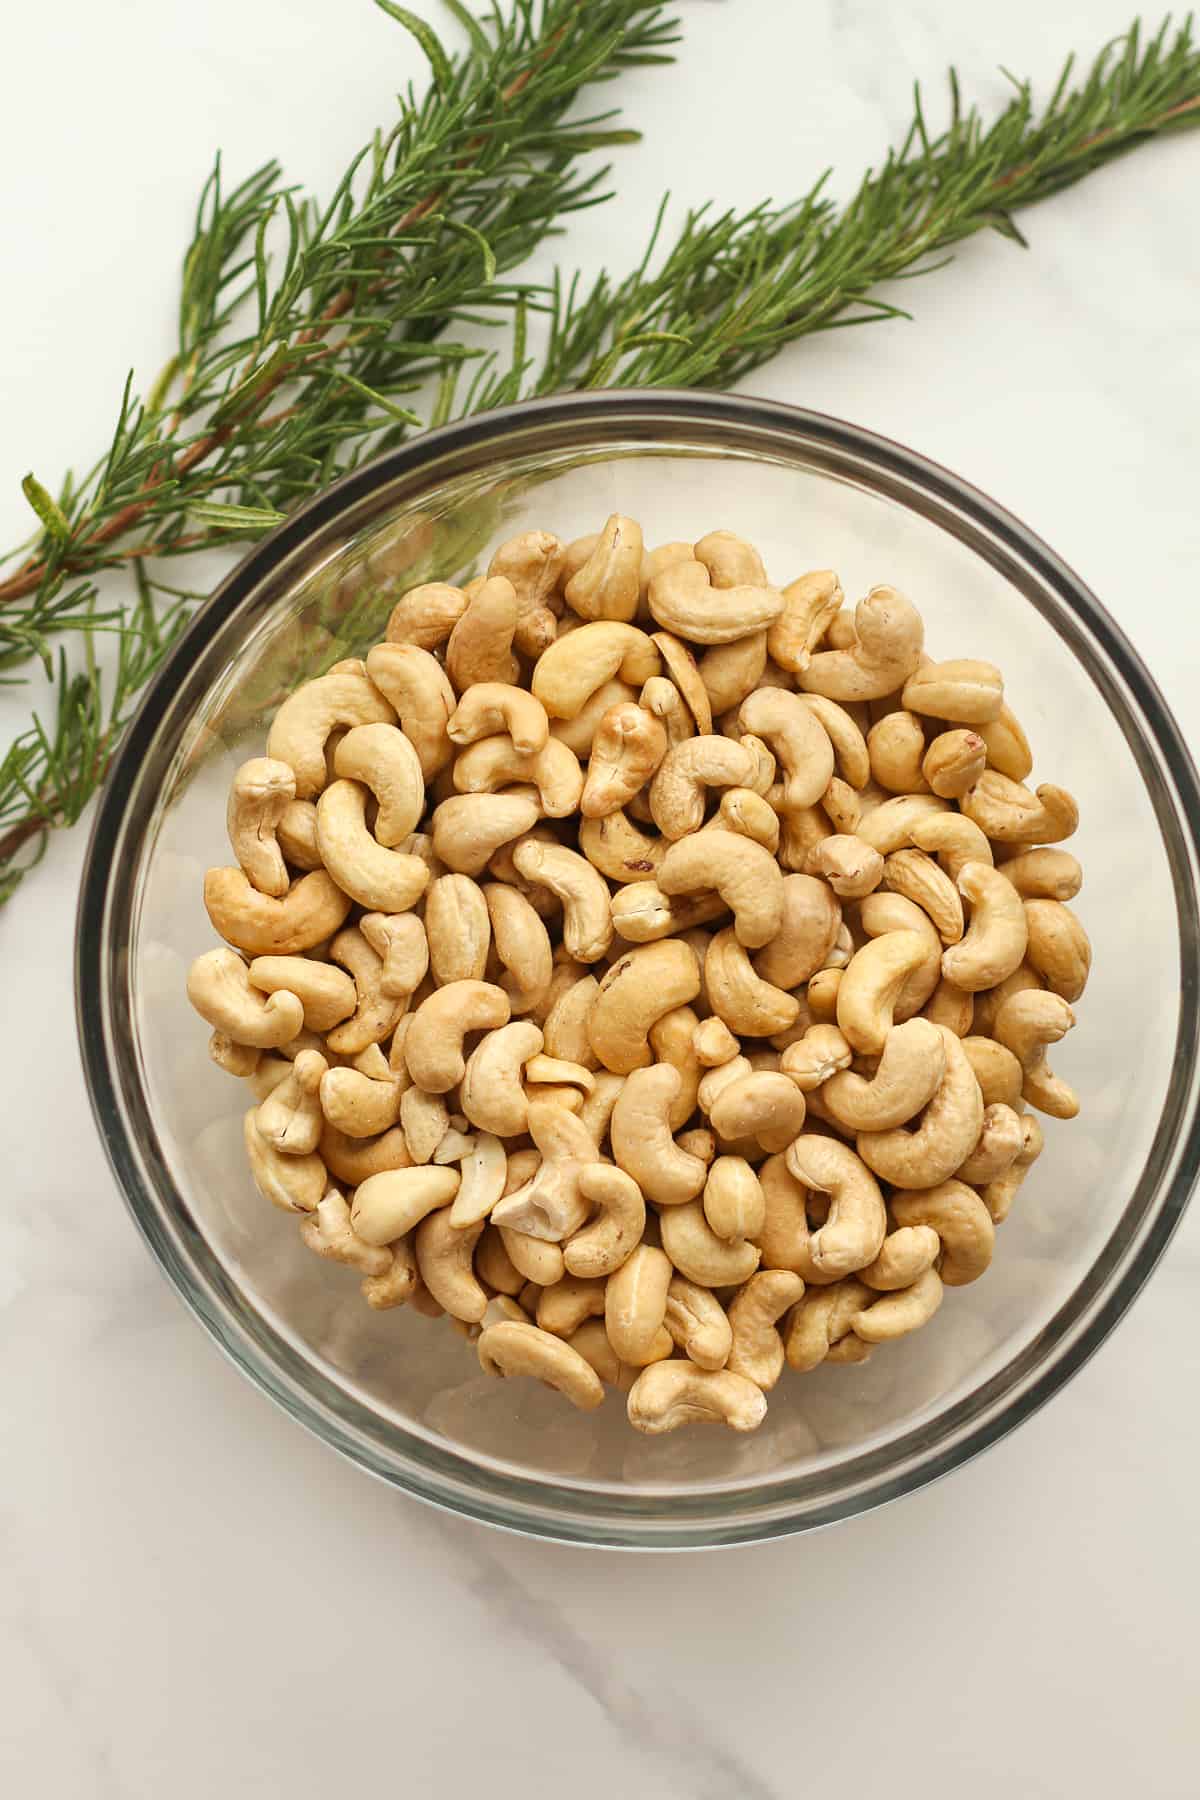 A bowl of raw cashews with some rosemary sprigs.